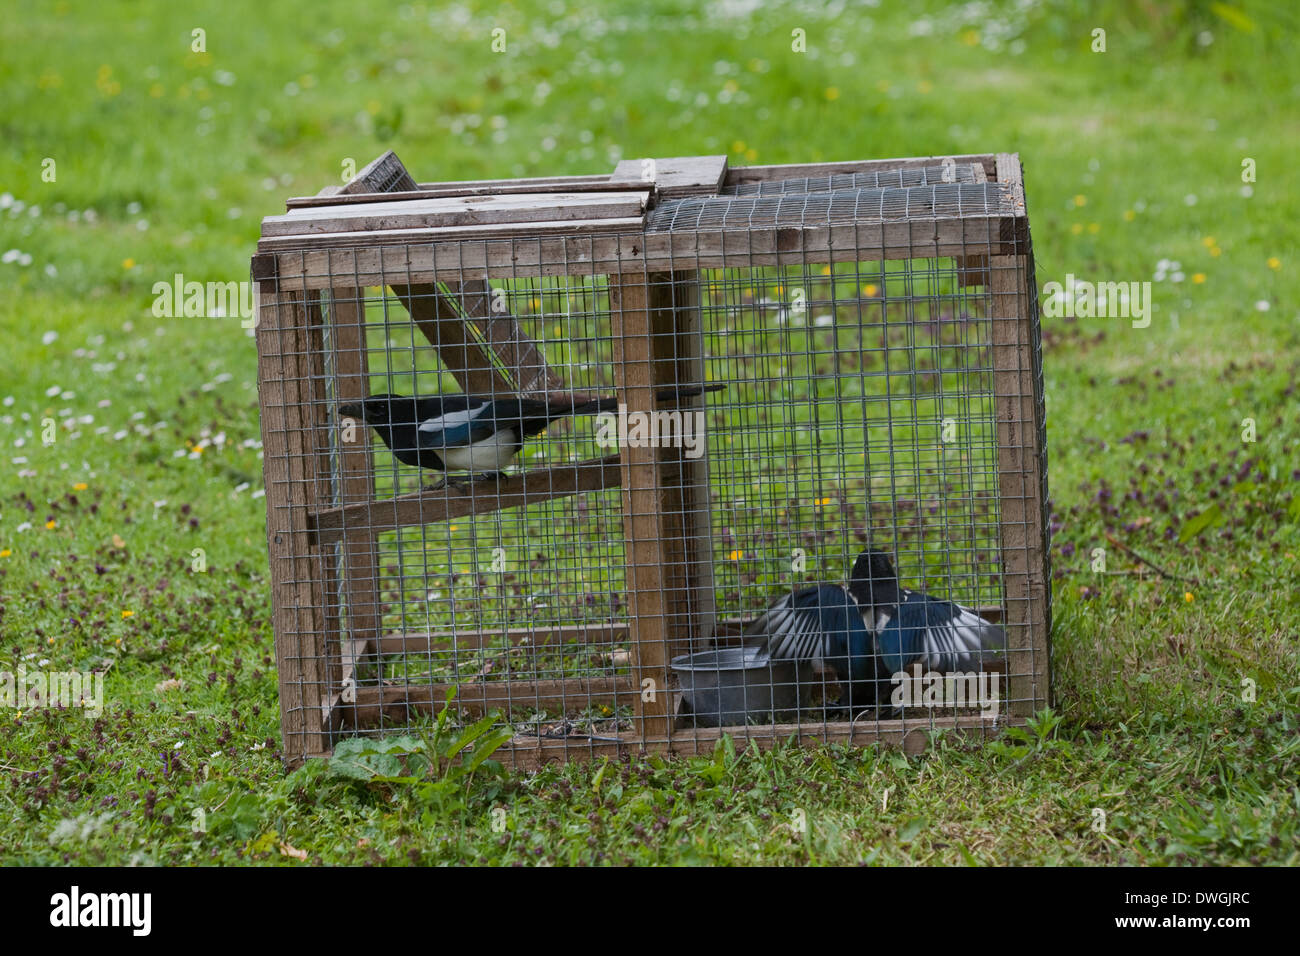 Larsen Trap. Used by gamekeepers and others to catch Magpies (Pica pica) and some other crow species. Live bird used to decoy Stock Photo